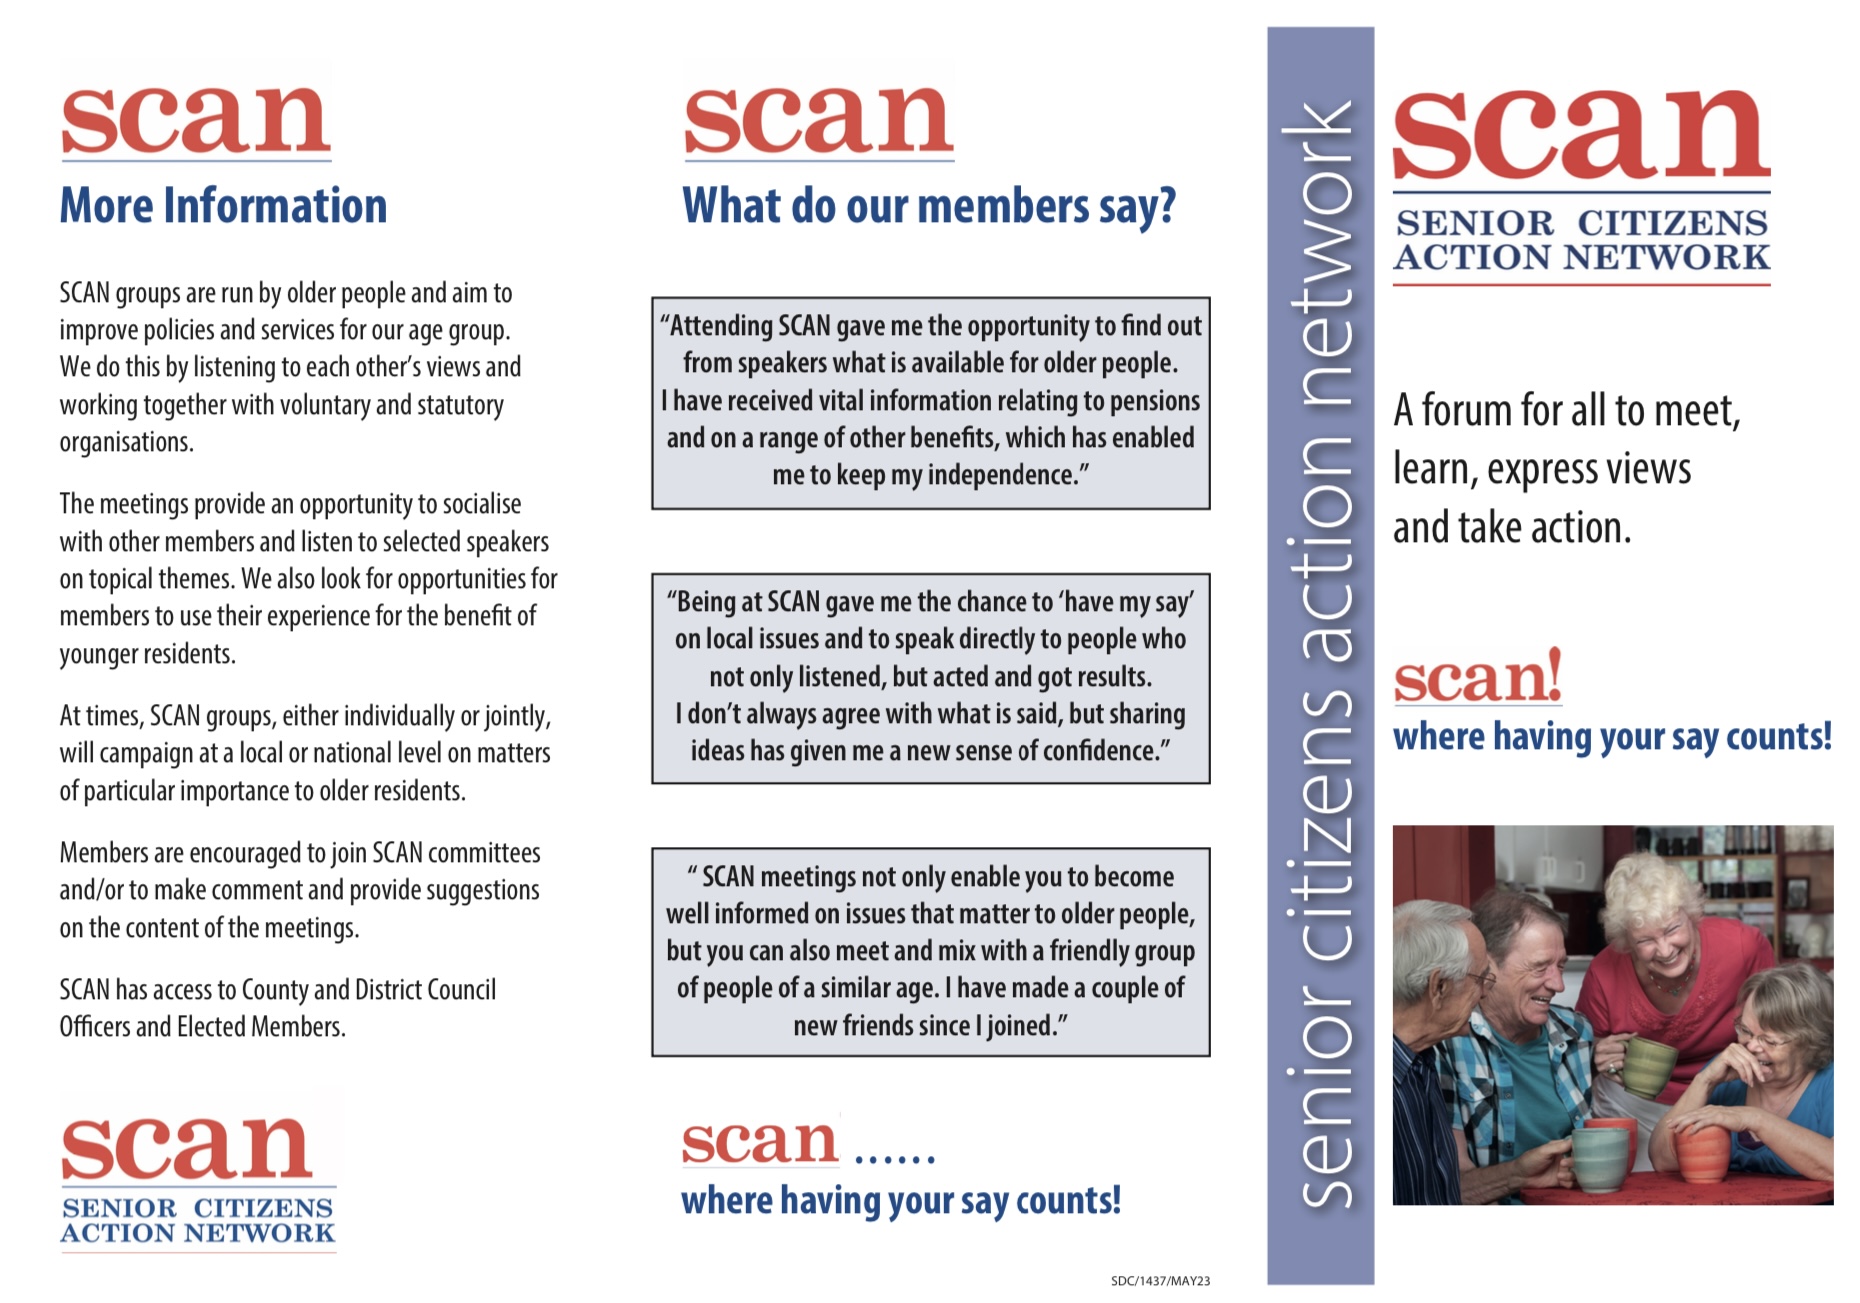 Shipston on Stour Senior Citizens Action Network (SCAN) - Where having your say counts